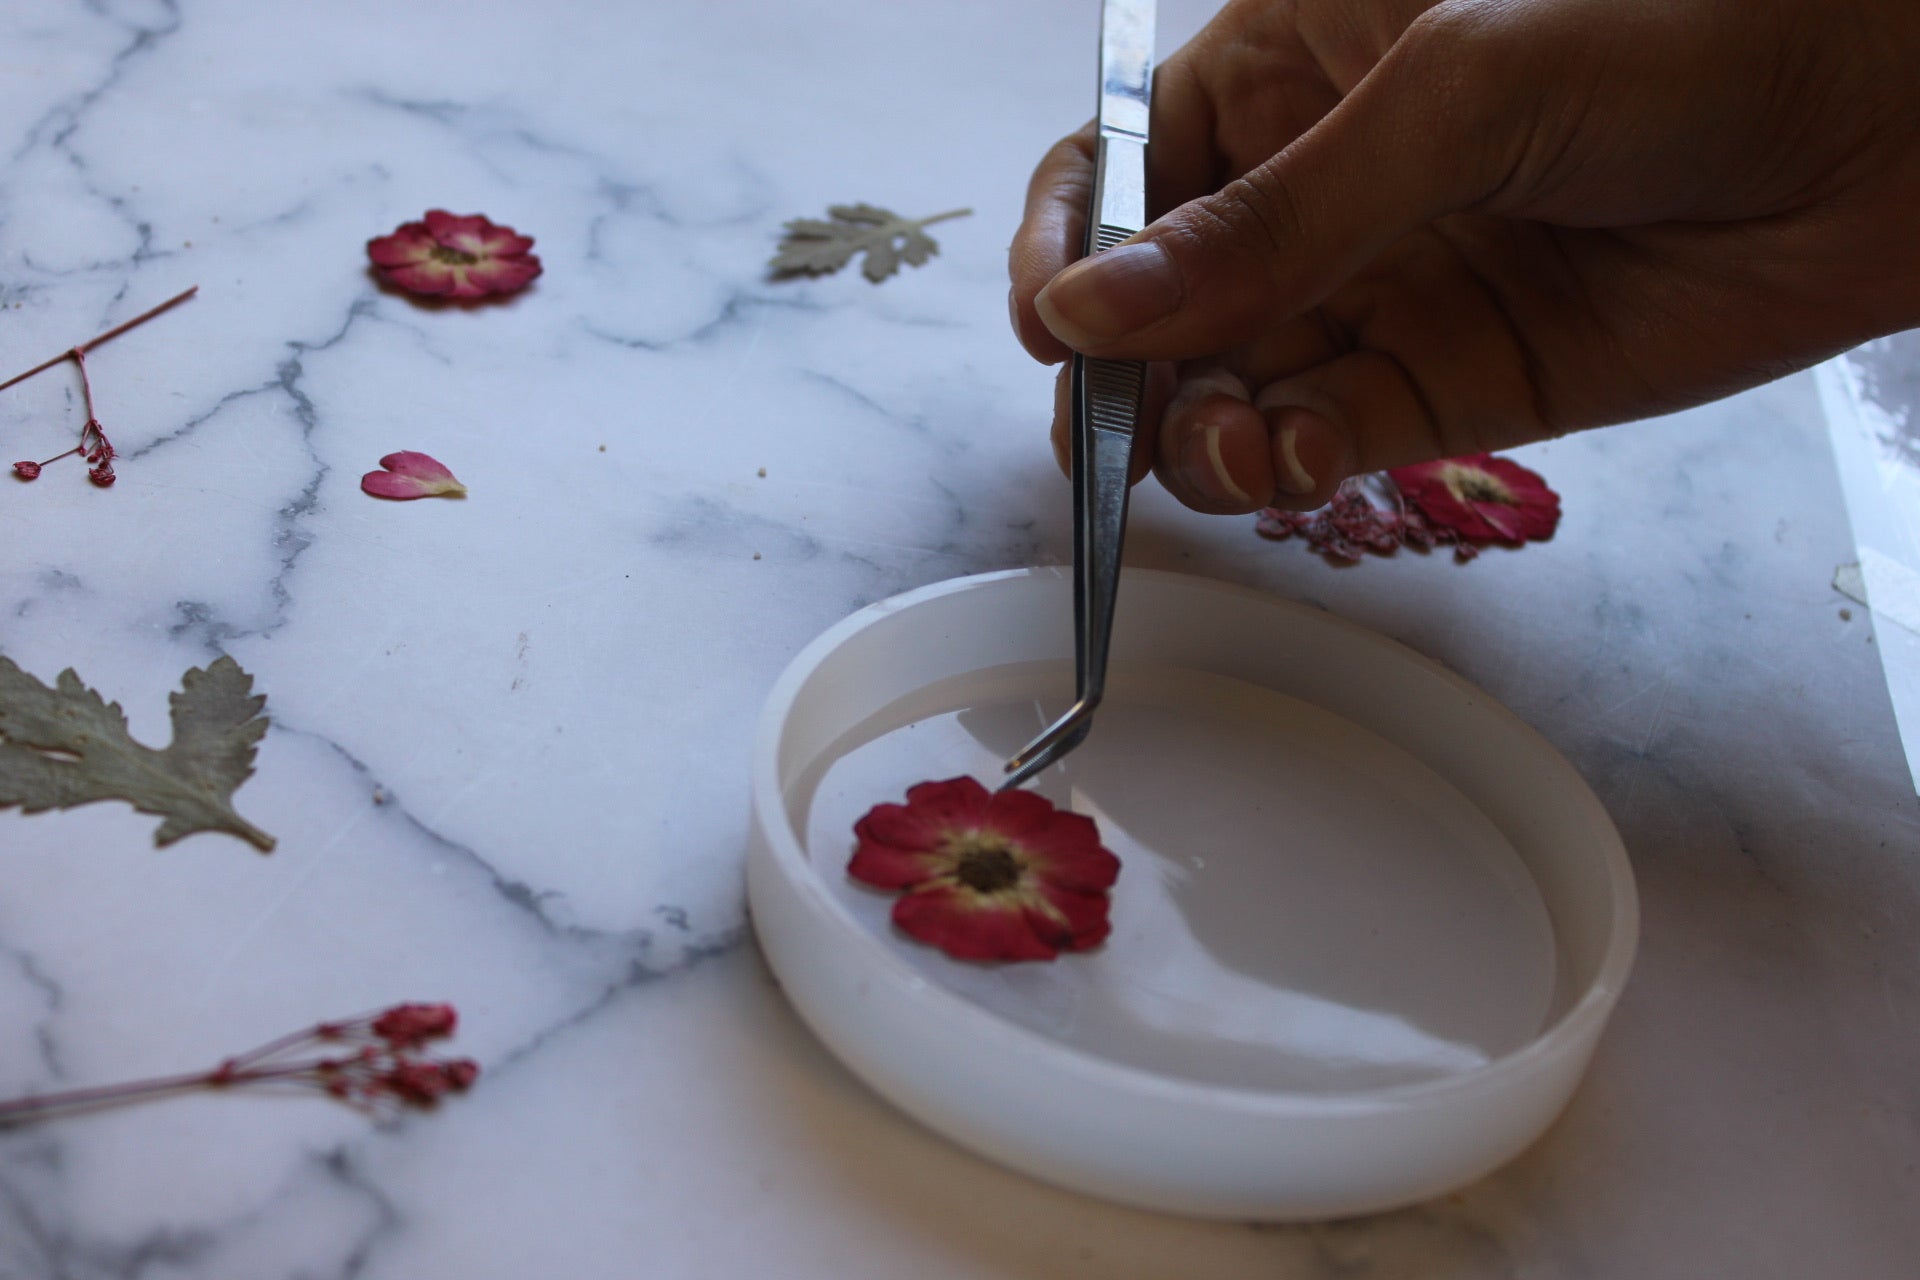 DIY All-In-One Floral Resin Coaster Craft Kit – Paper Clouds